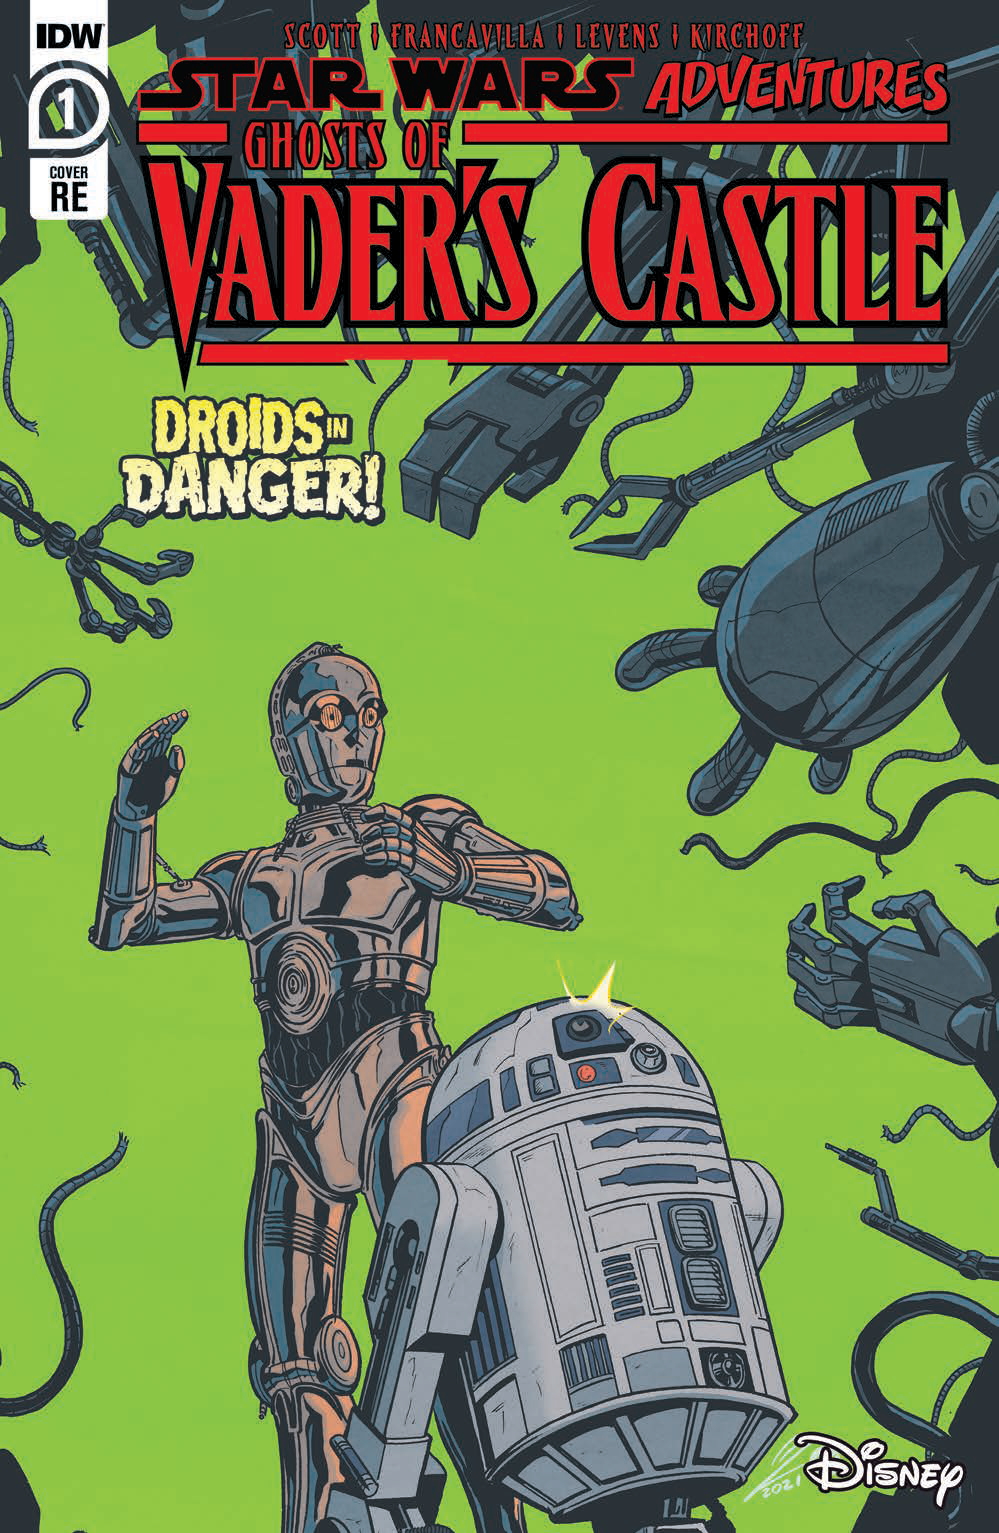 Ghosts of Vader's Castle #1 (Megan Levens Diamond Retailers Summit 2021 Variant Cover) (26.09.2021)